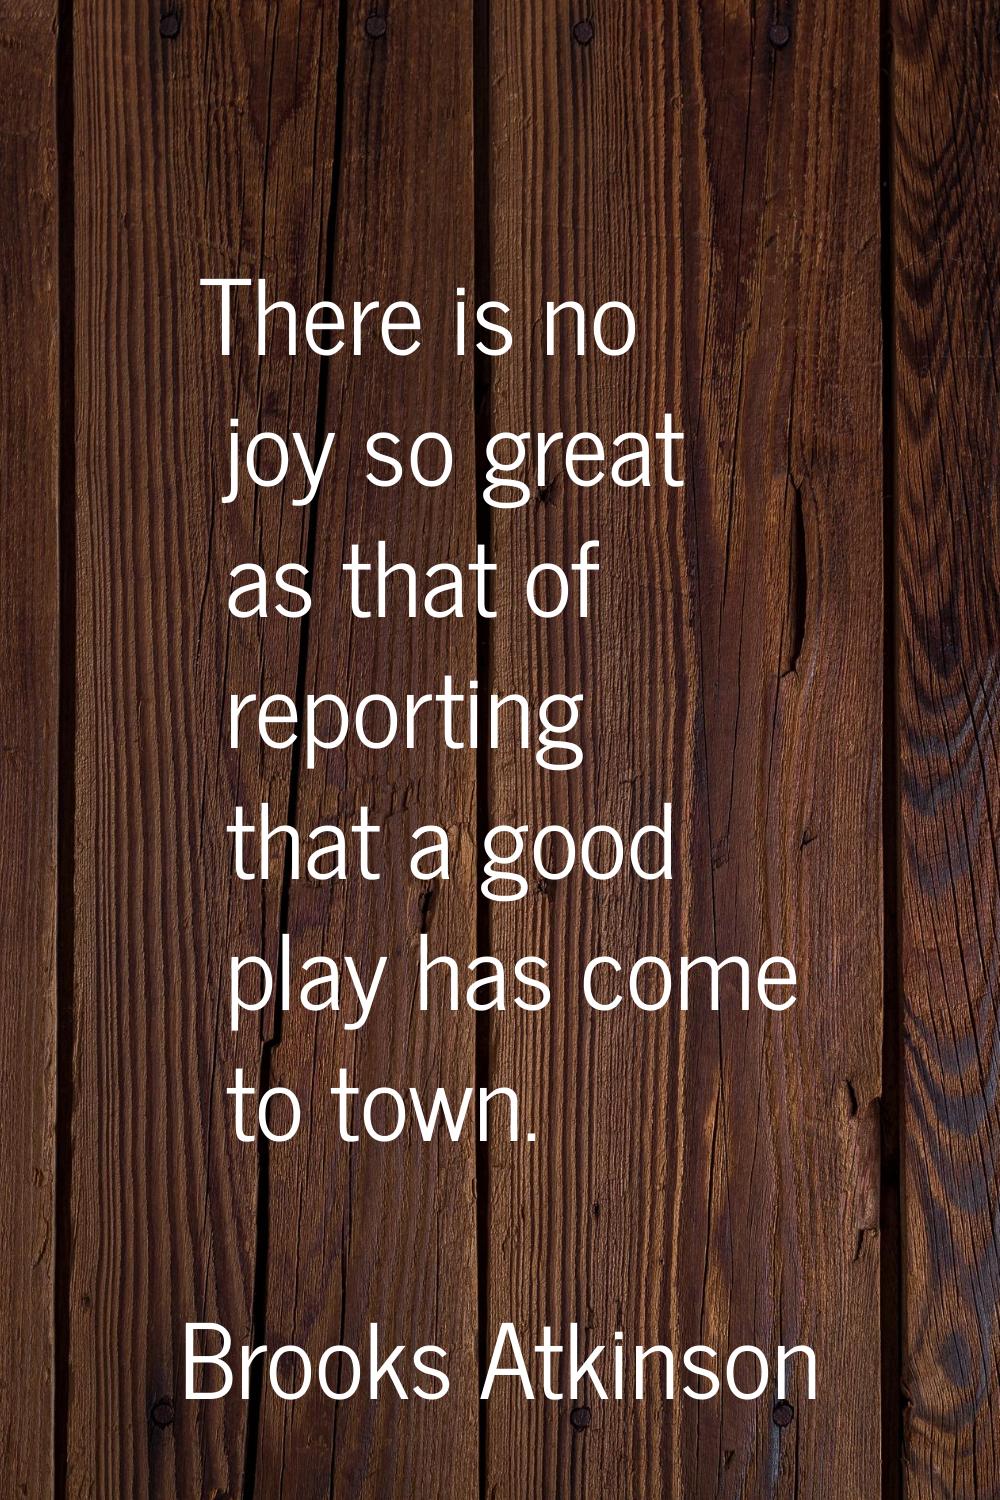 There is no joy so great as that of reporting that a good play has come to town.